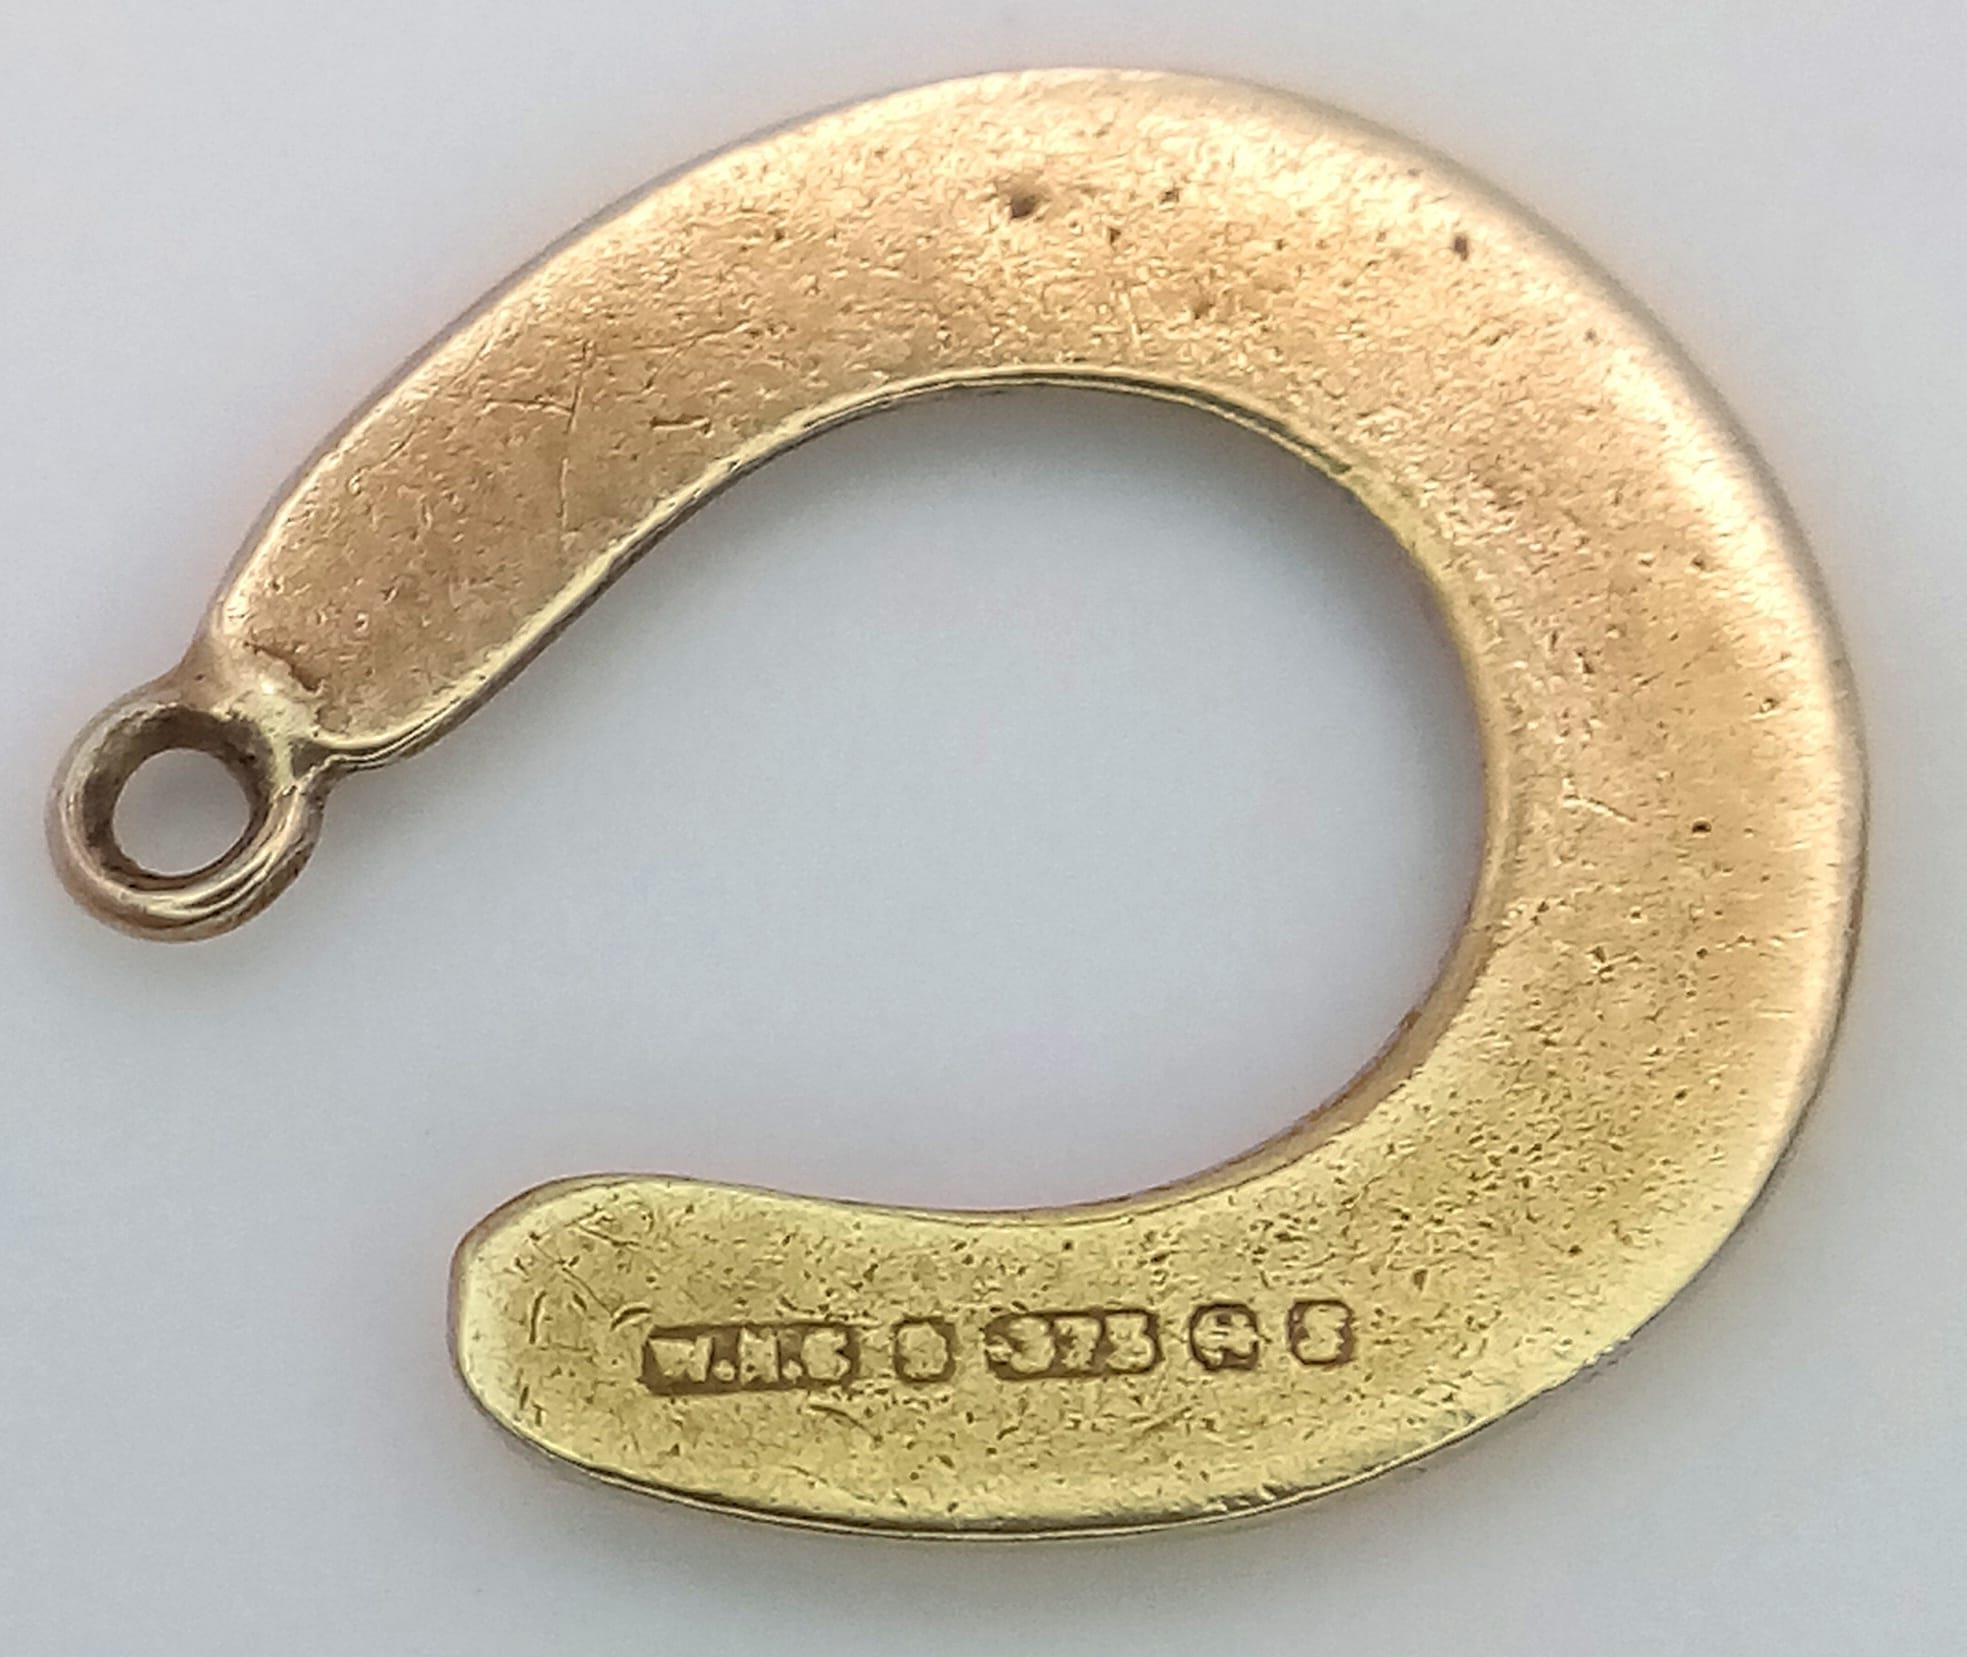 Three 9K Gold Pendants/ Charms - Pram, keys and lucky horseshoe! 2.76g total weight. - Image 2 of 4